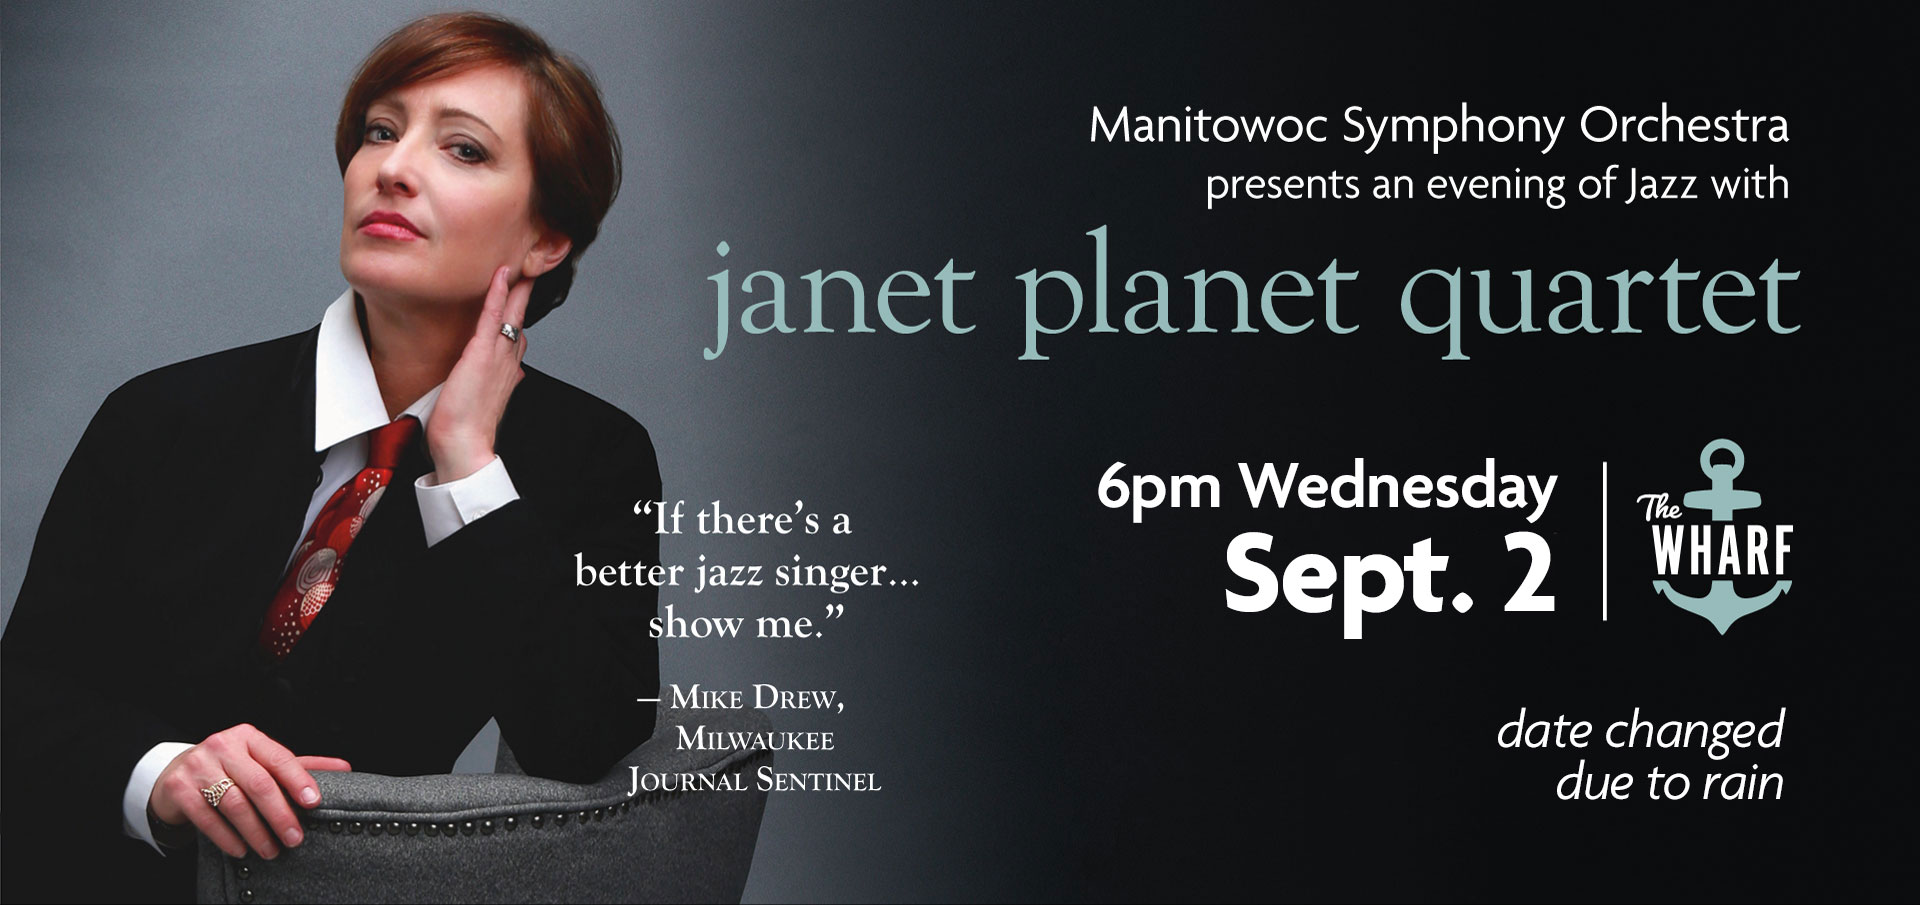 a woman in a black suit and red patterned tie leans on a chair link to janet planet concert information